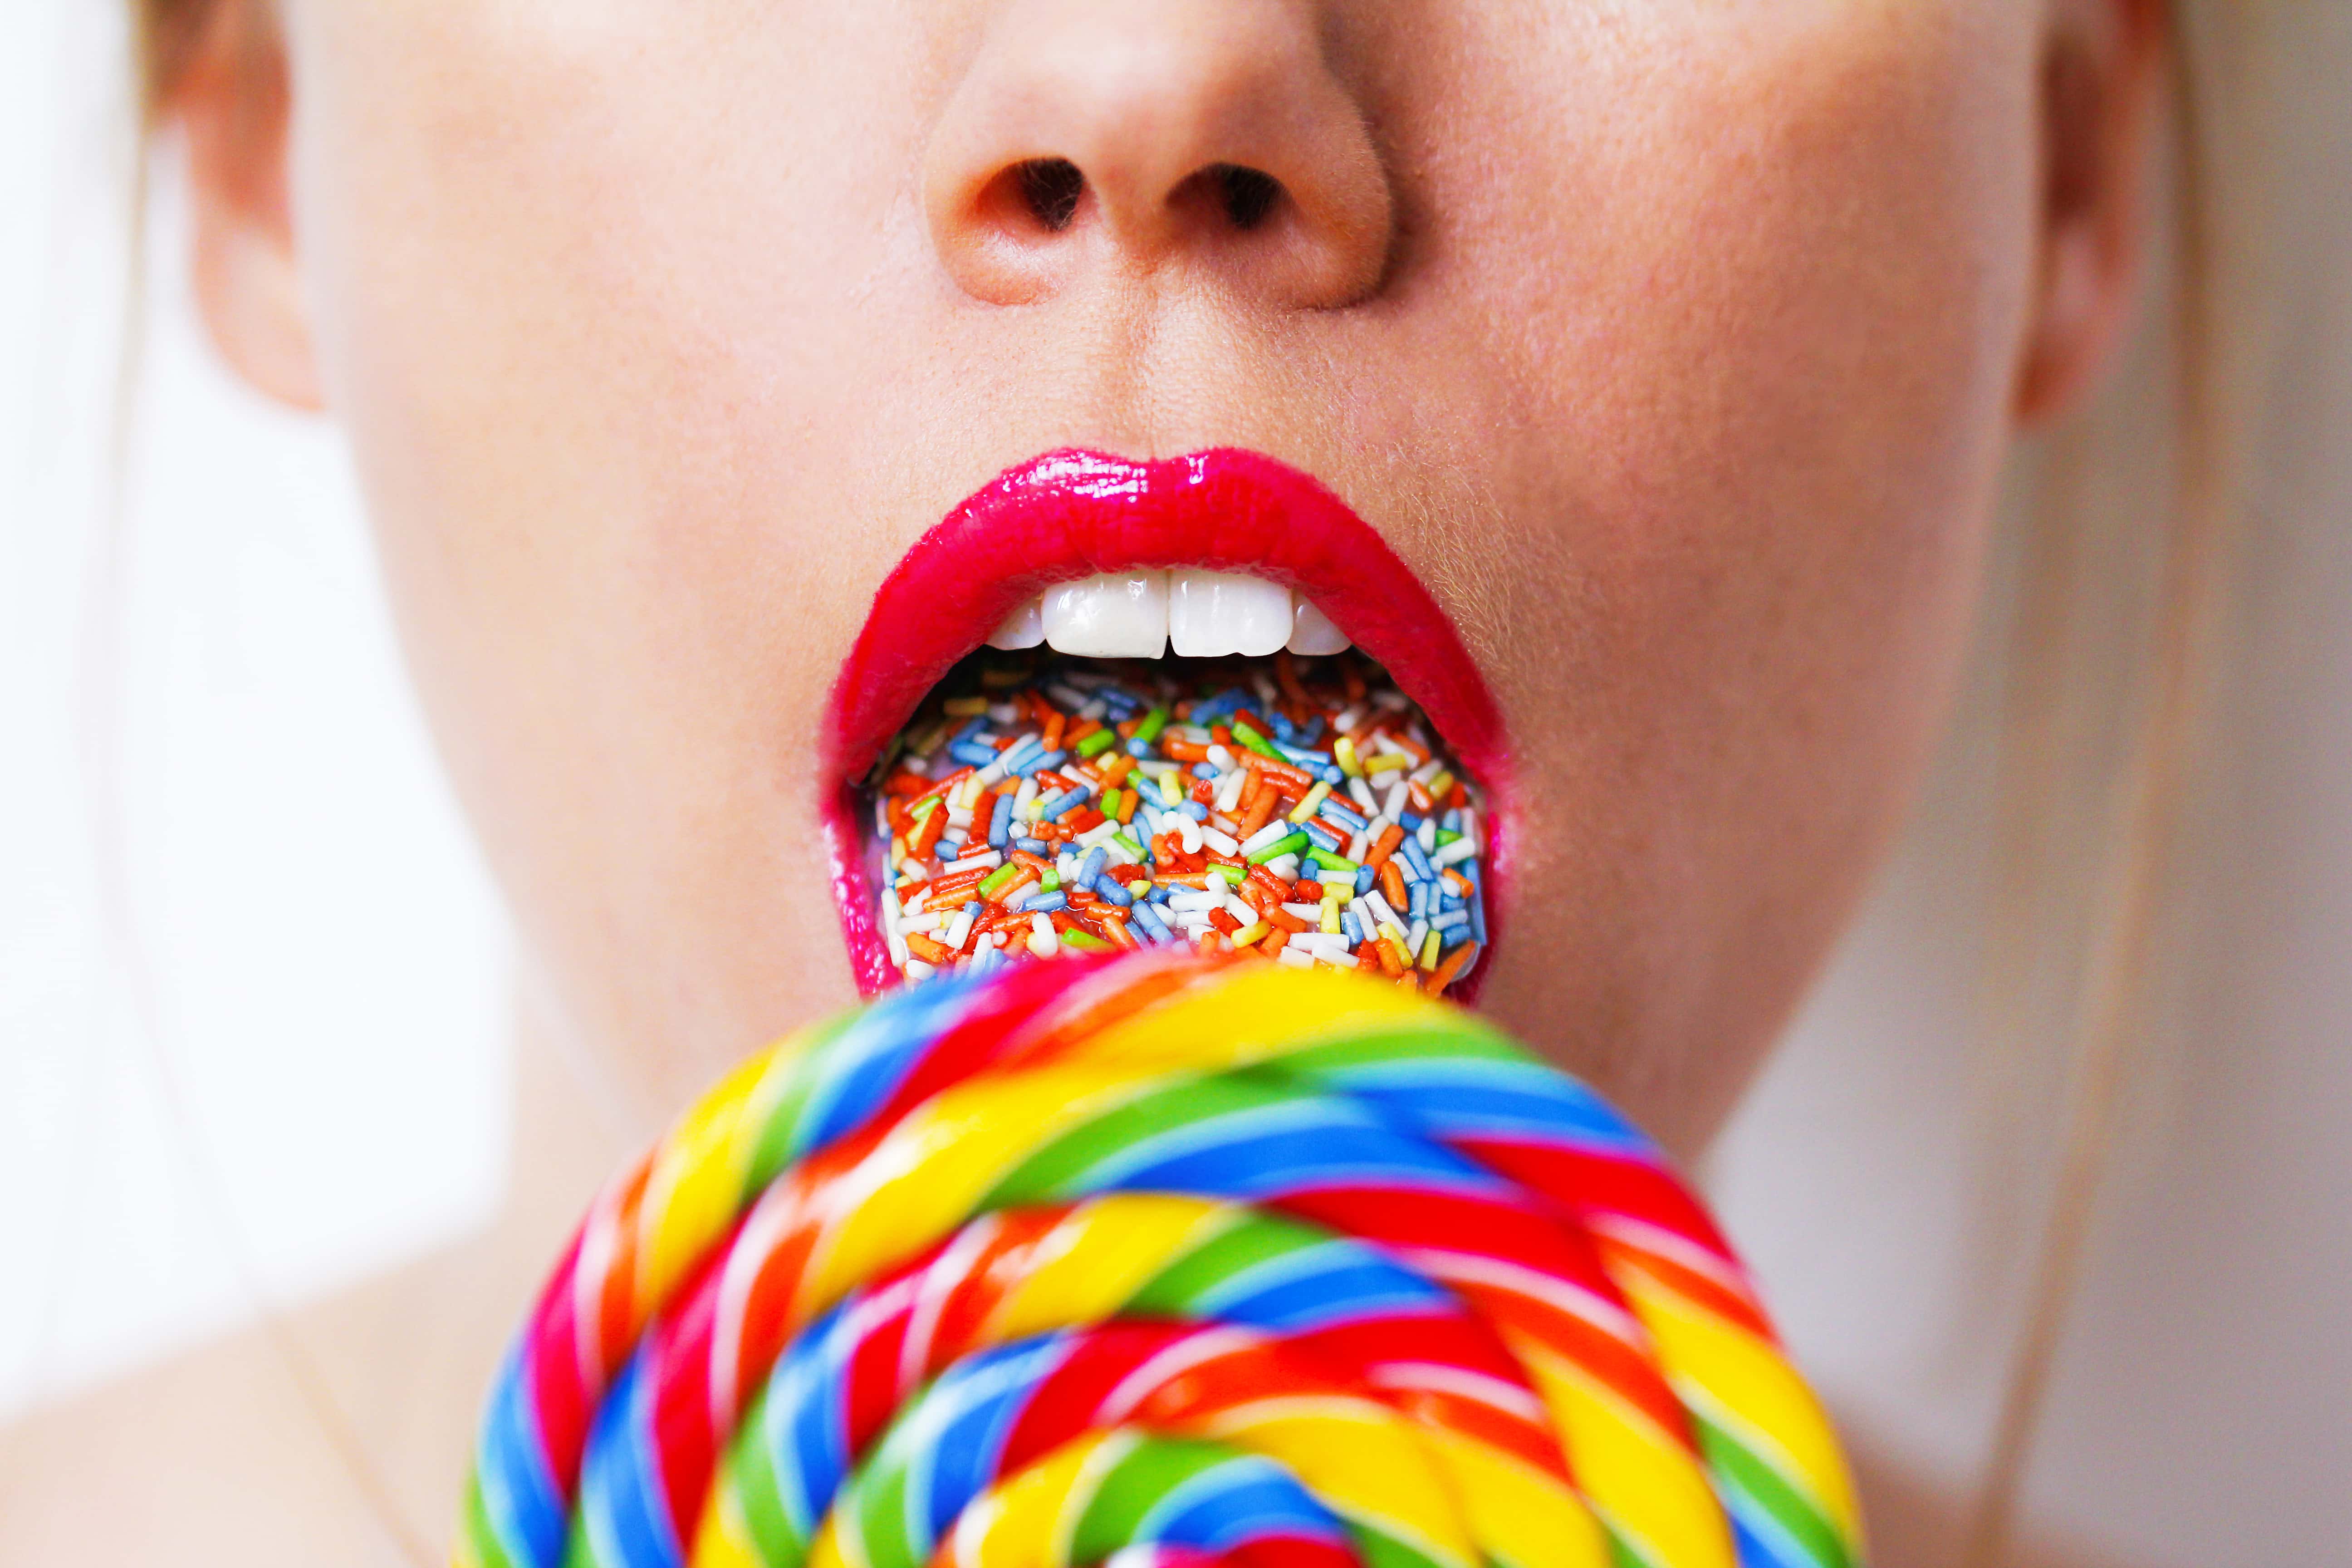 Woman licking colourful lollipop